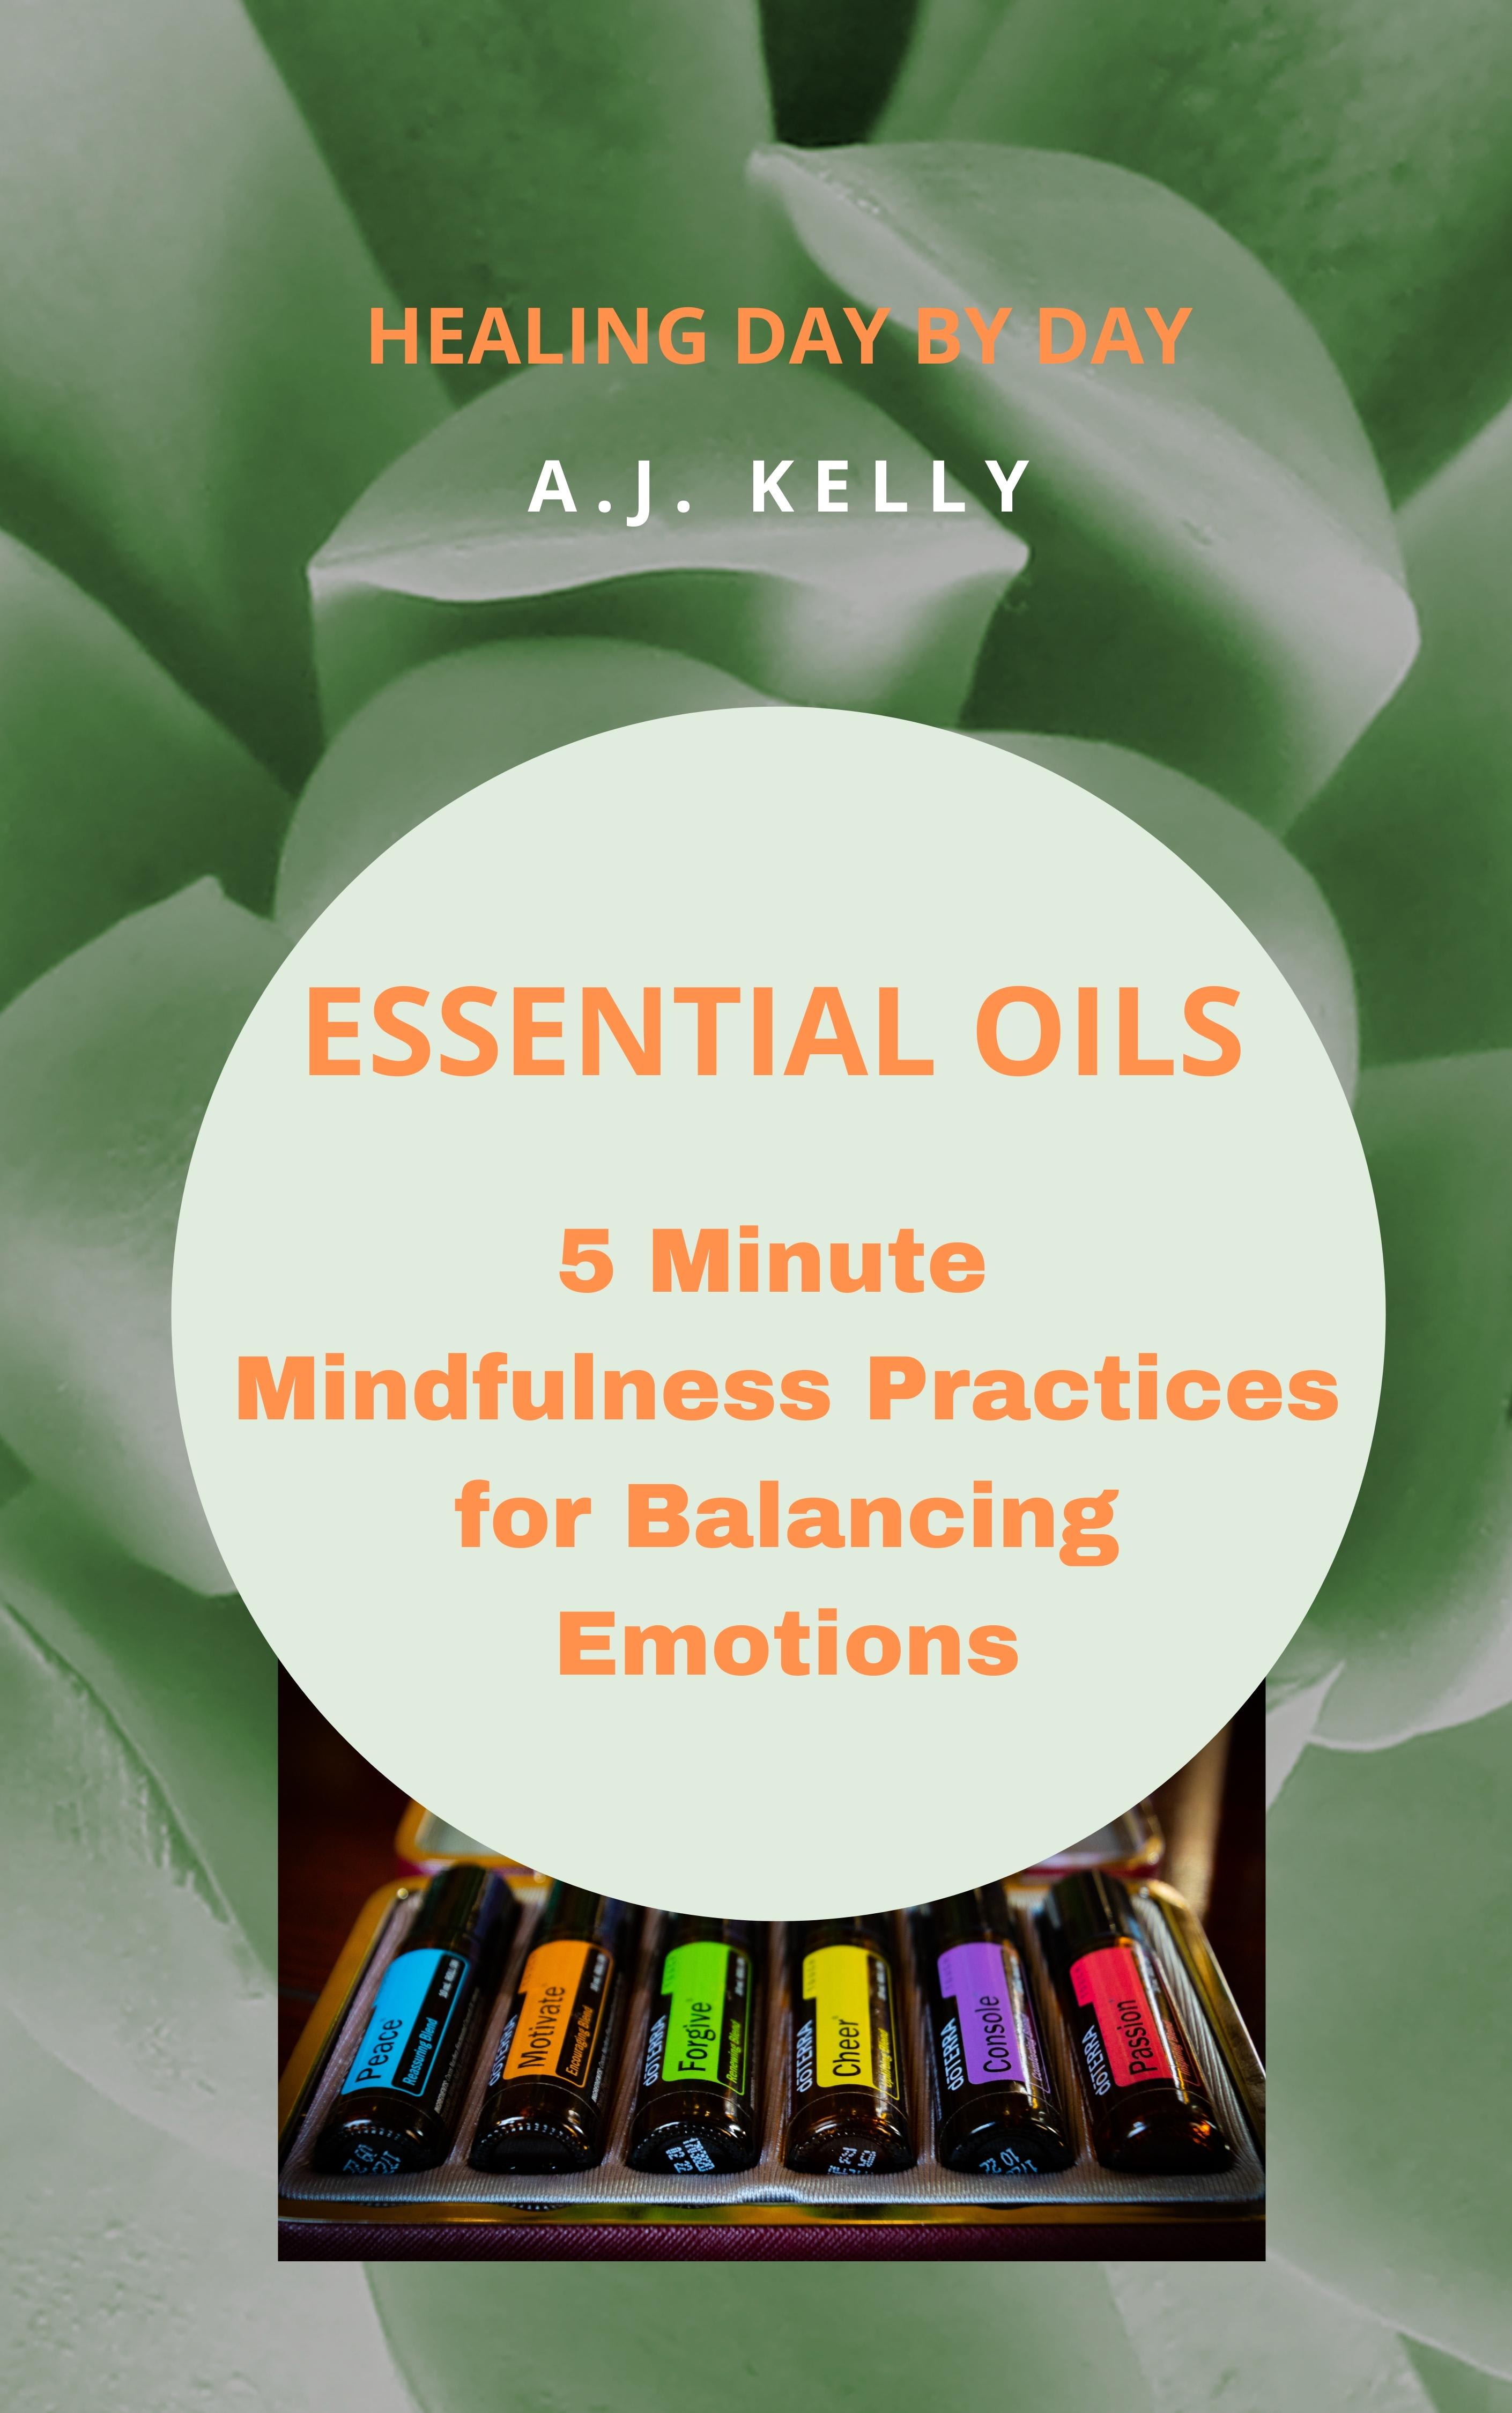 How to Make Essential Oils: 5 Complete Methods